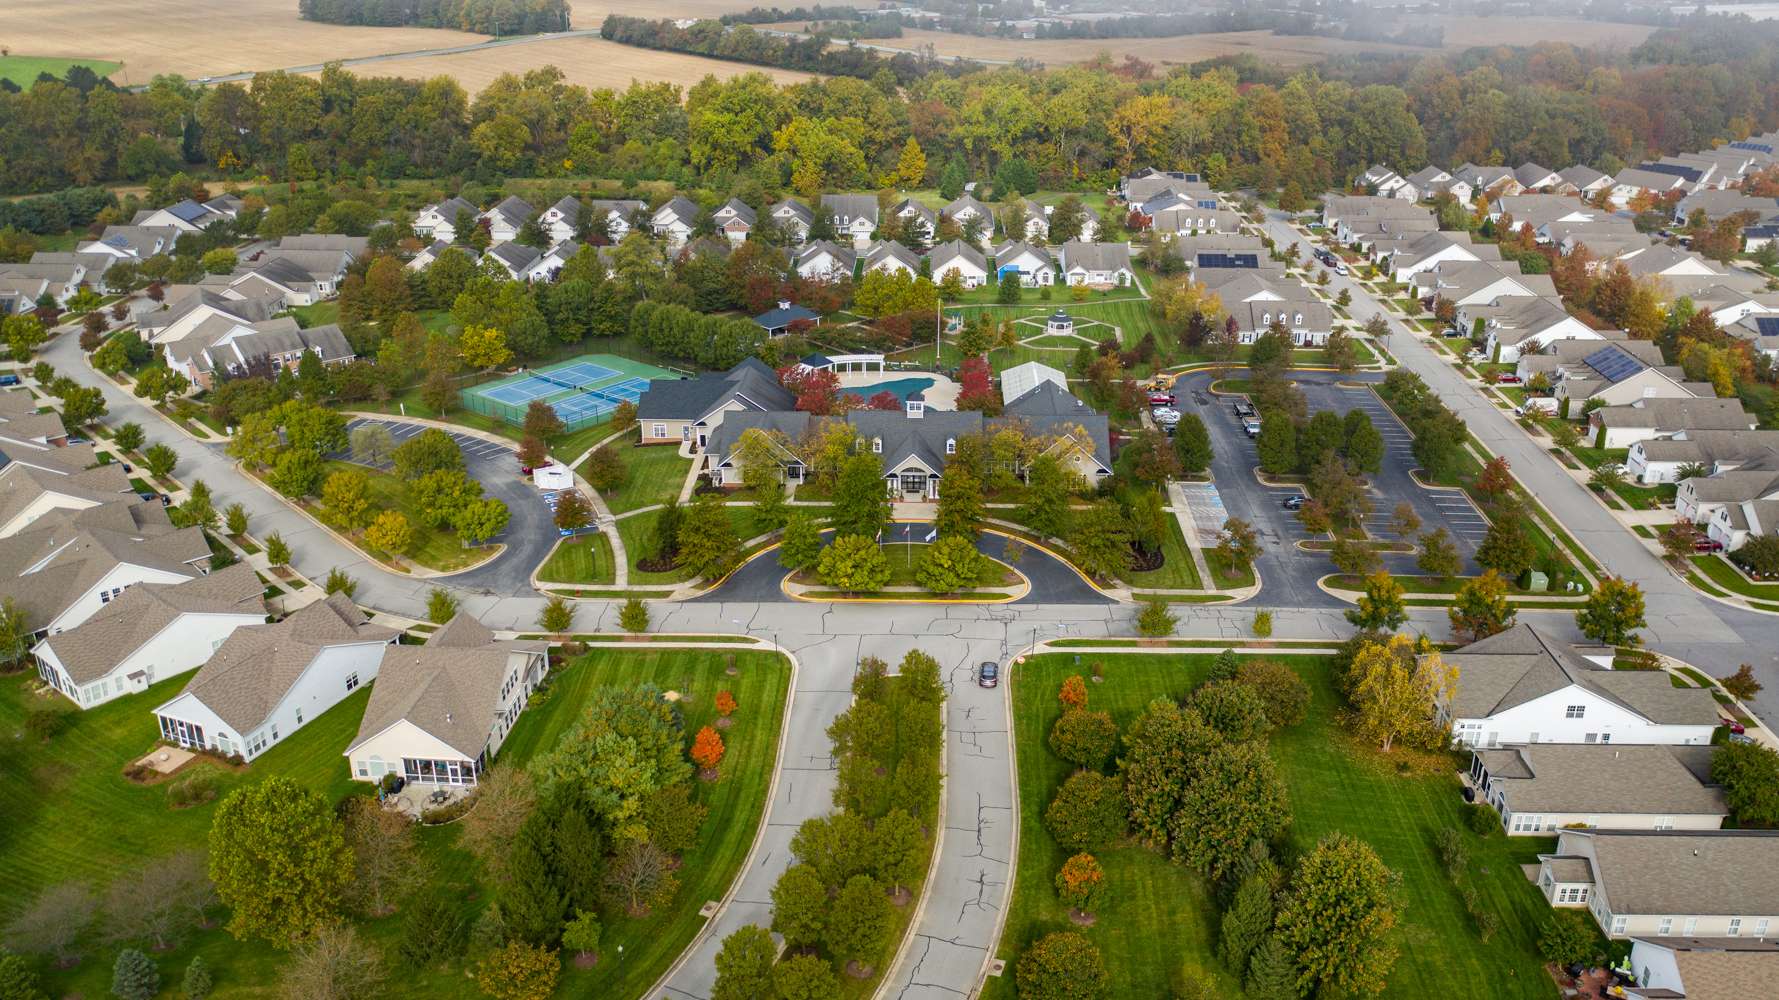 Aerial view of an HOA